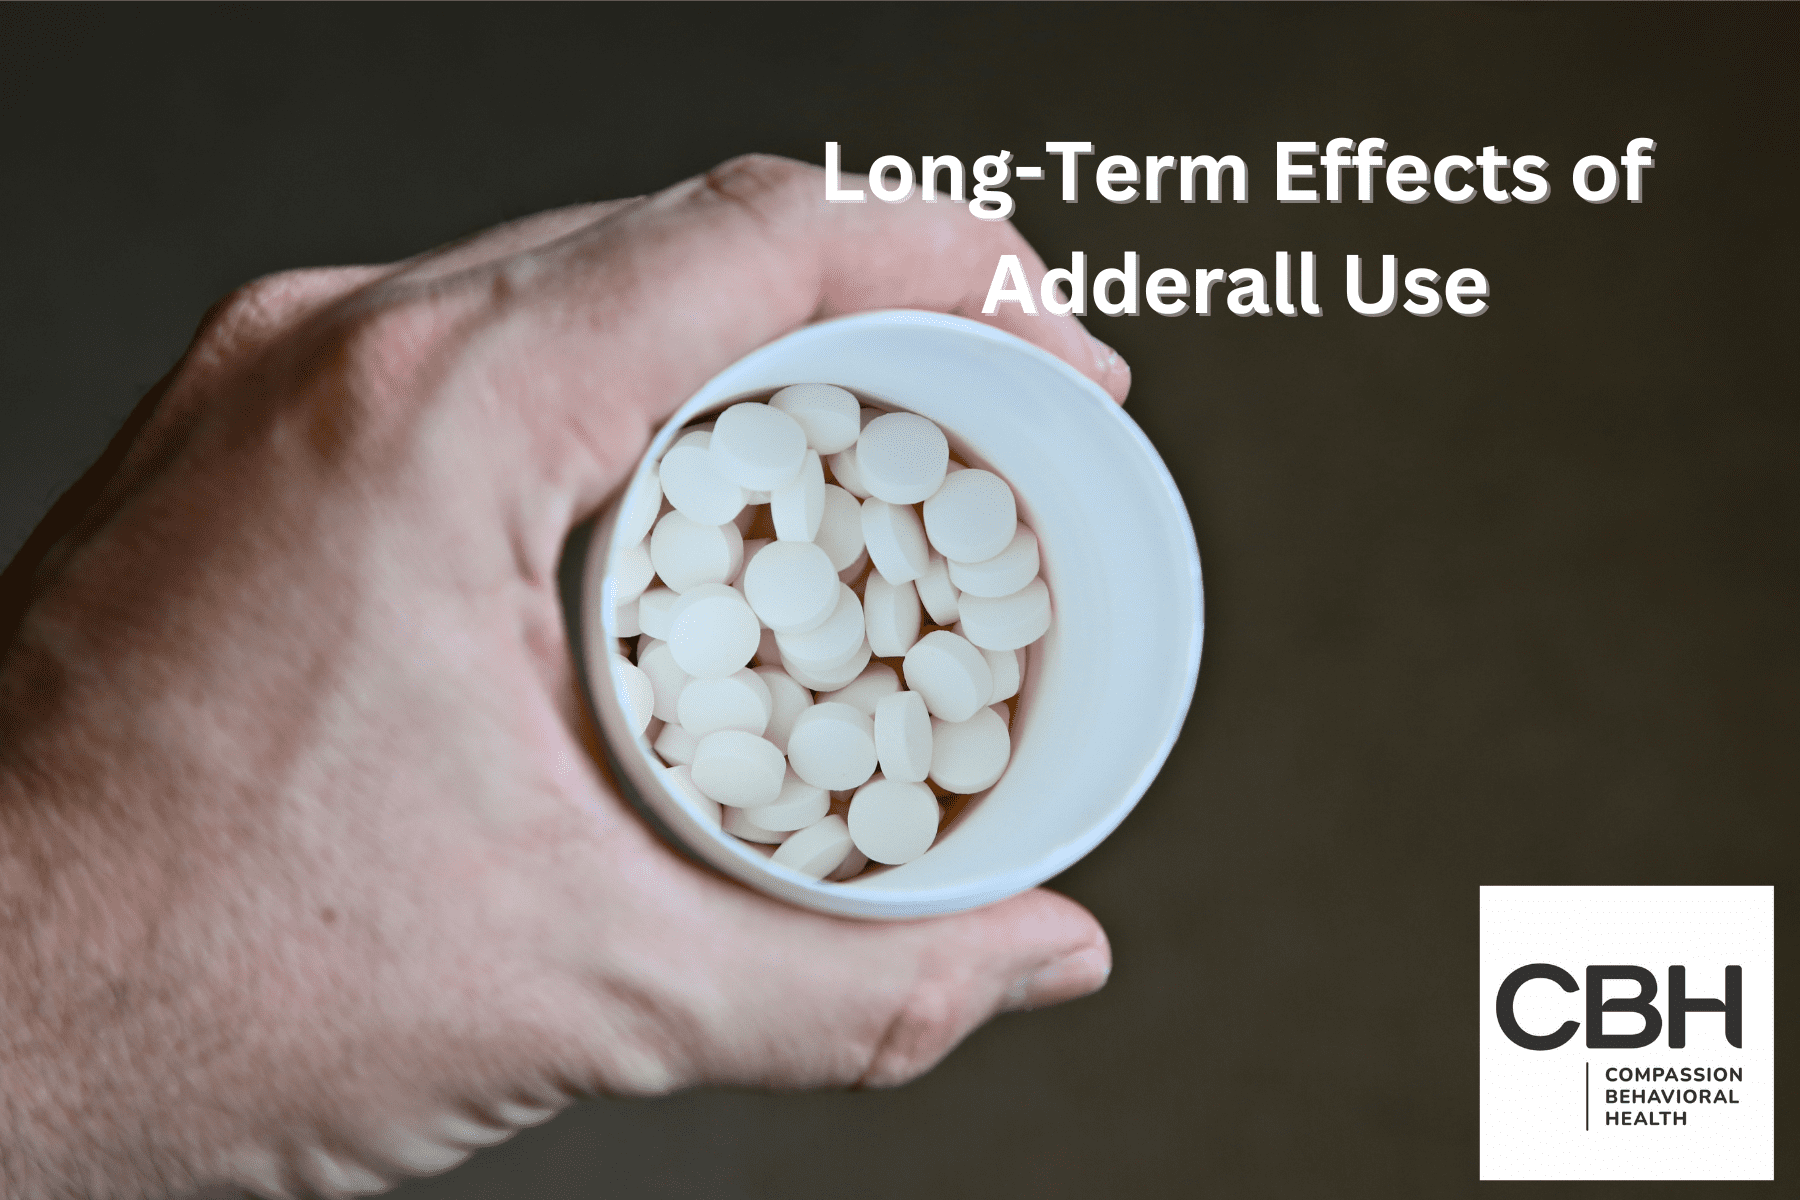 Long-Term Effects of Adderall Use